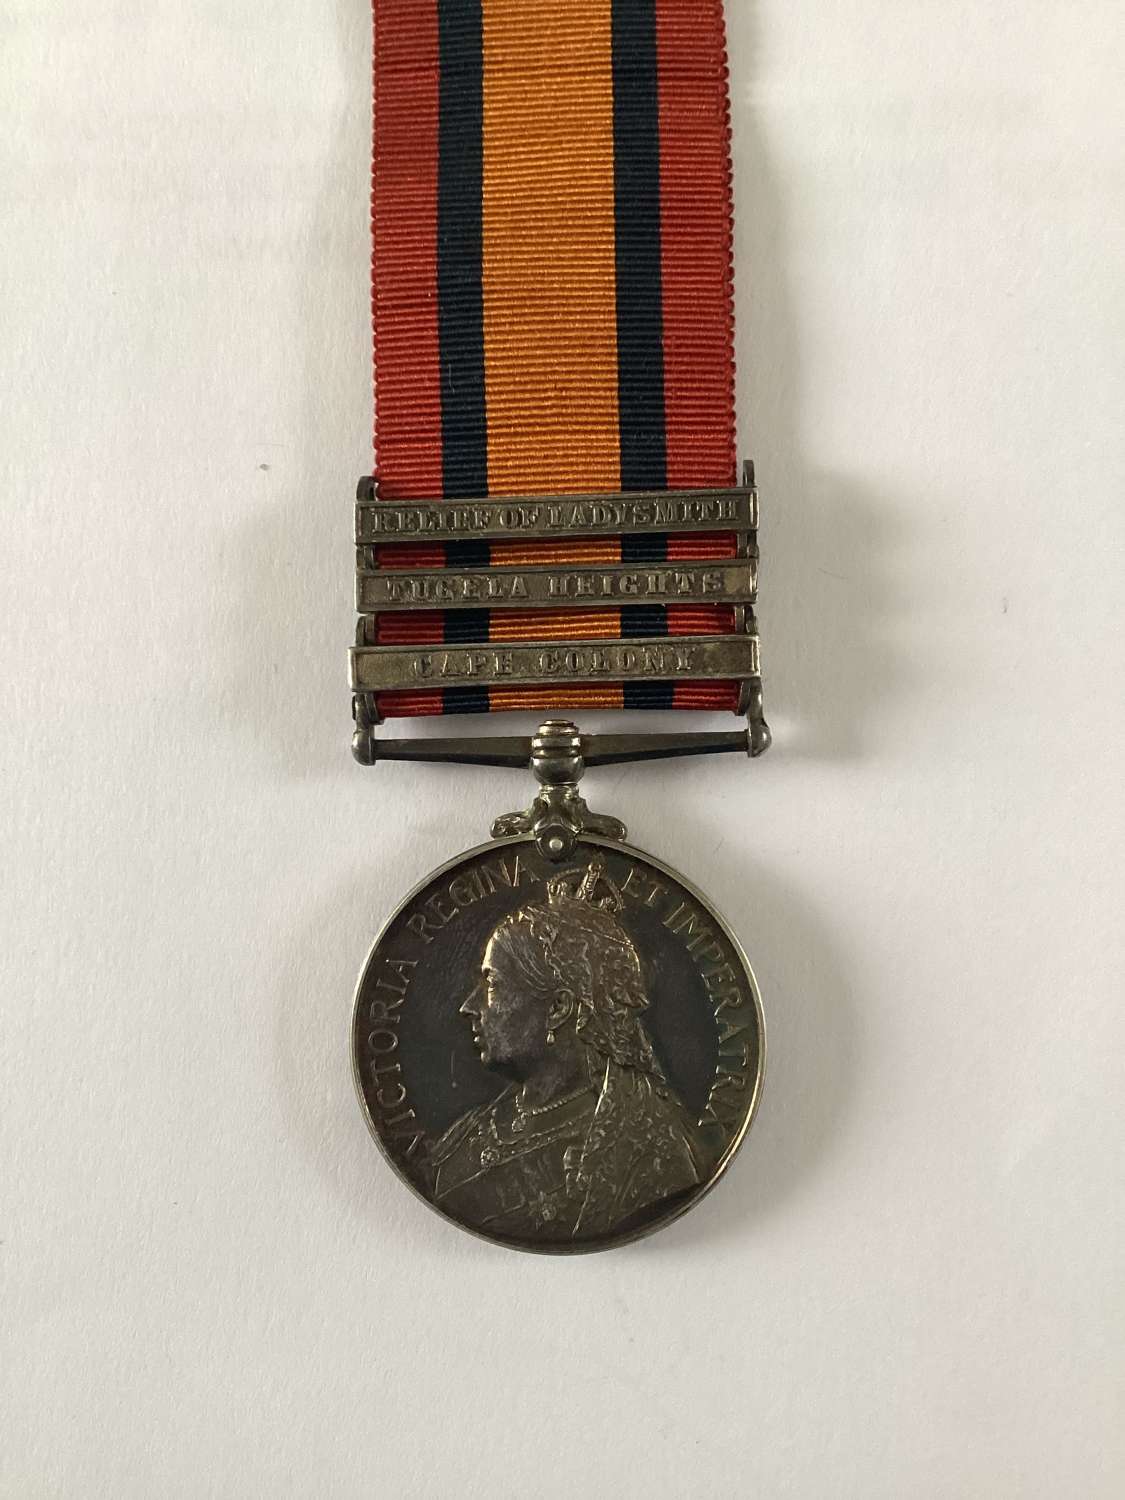 3 Bar Queens South Africa Medal  Royal Fusiliers Died of Disease